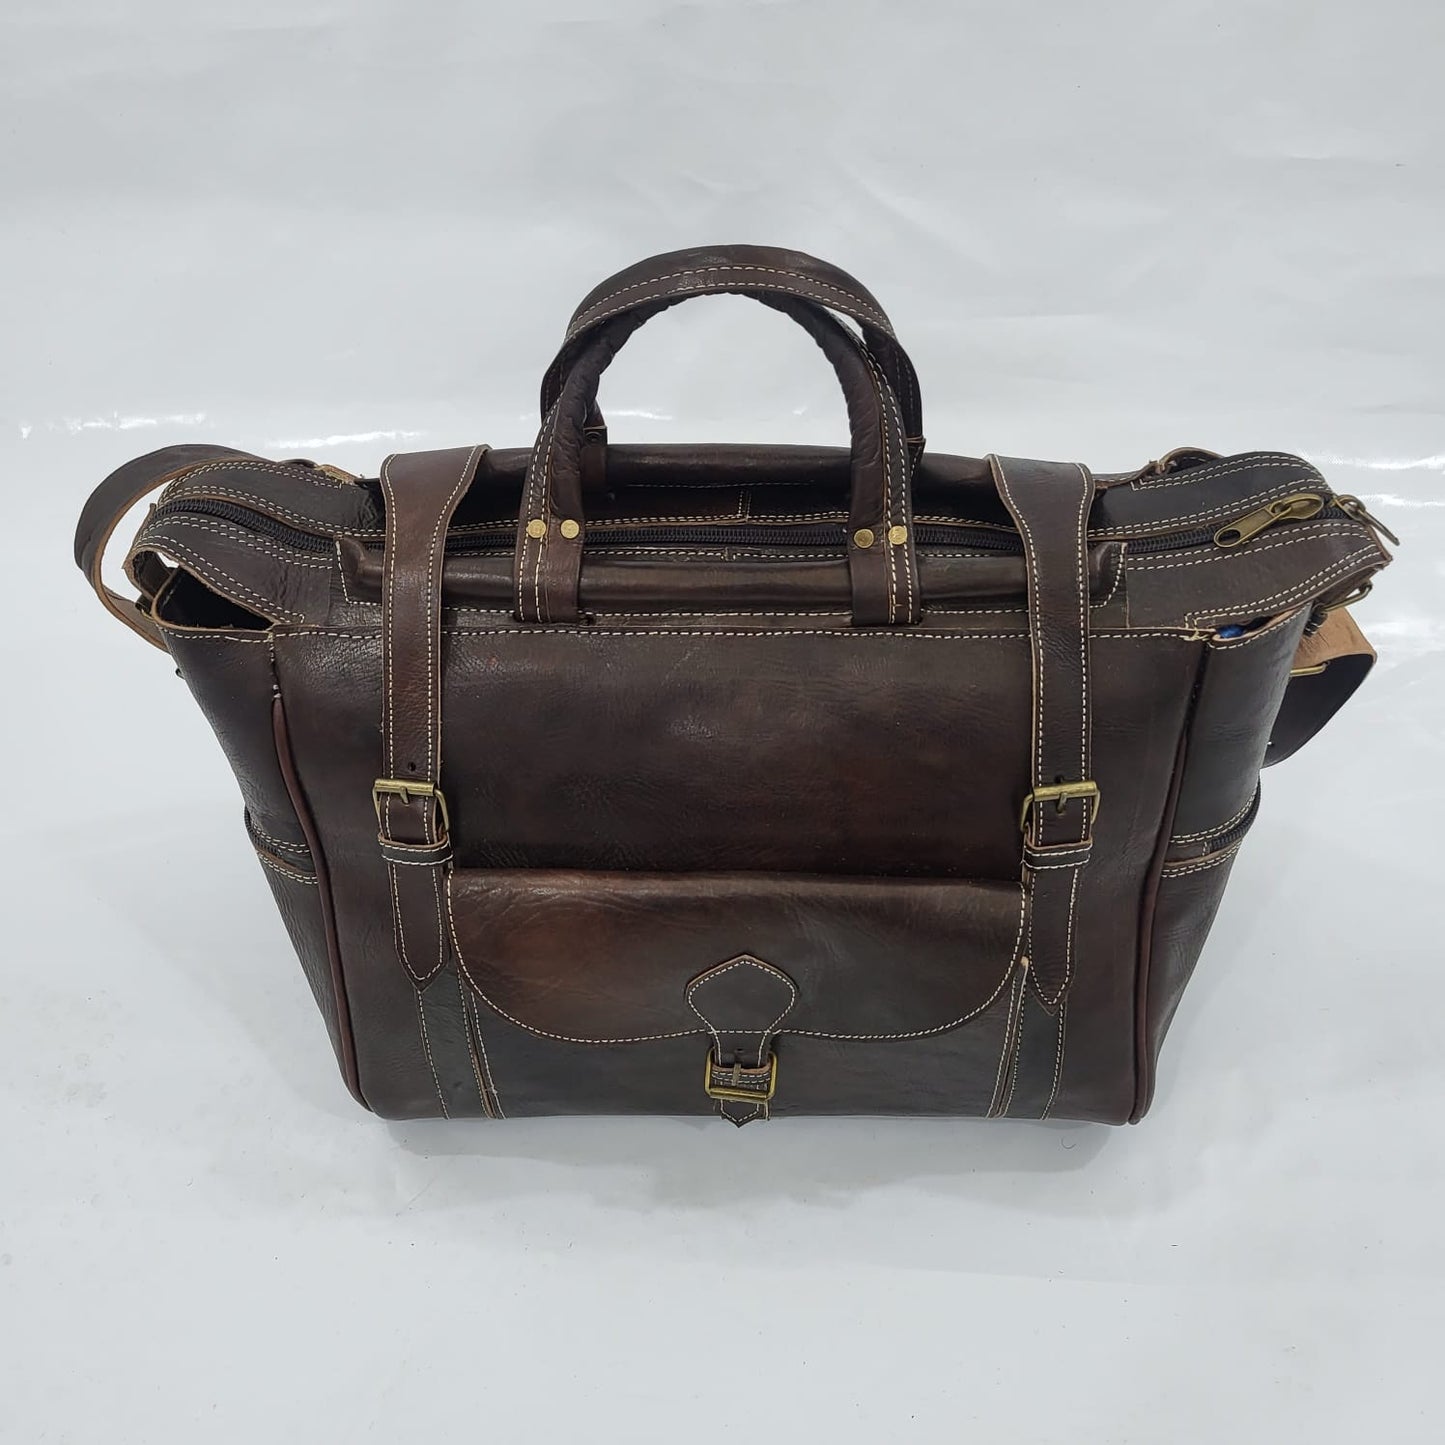 Artisanal Moroccan Leather Travel Bags Crafted Specifically for Men